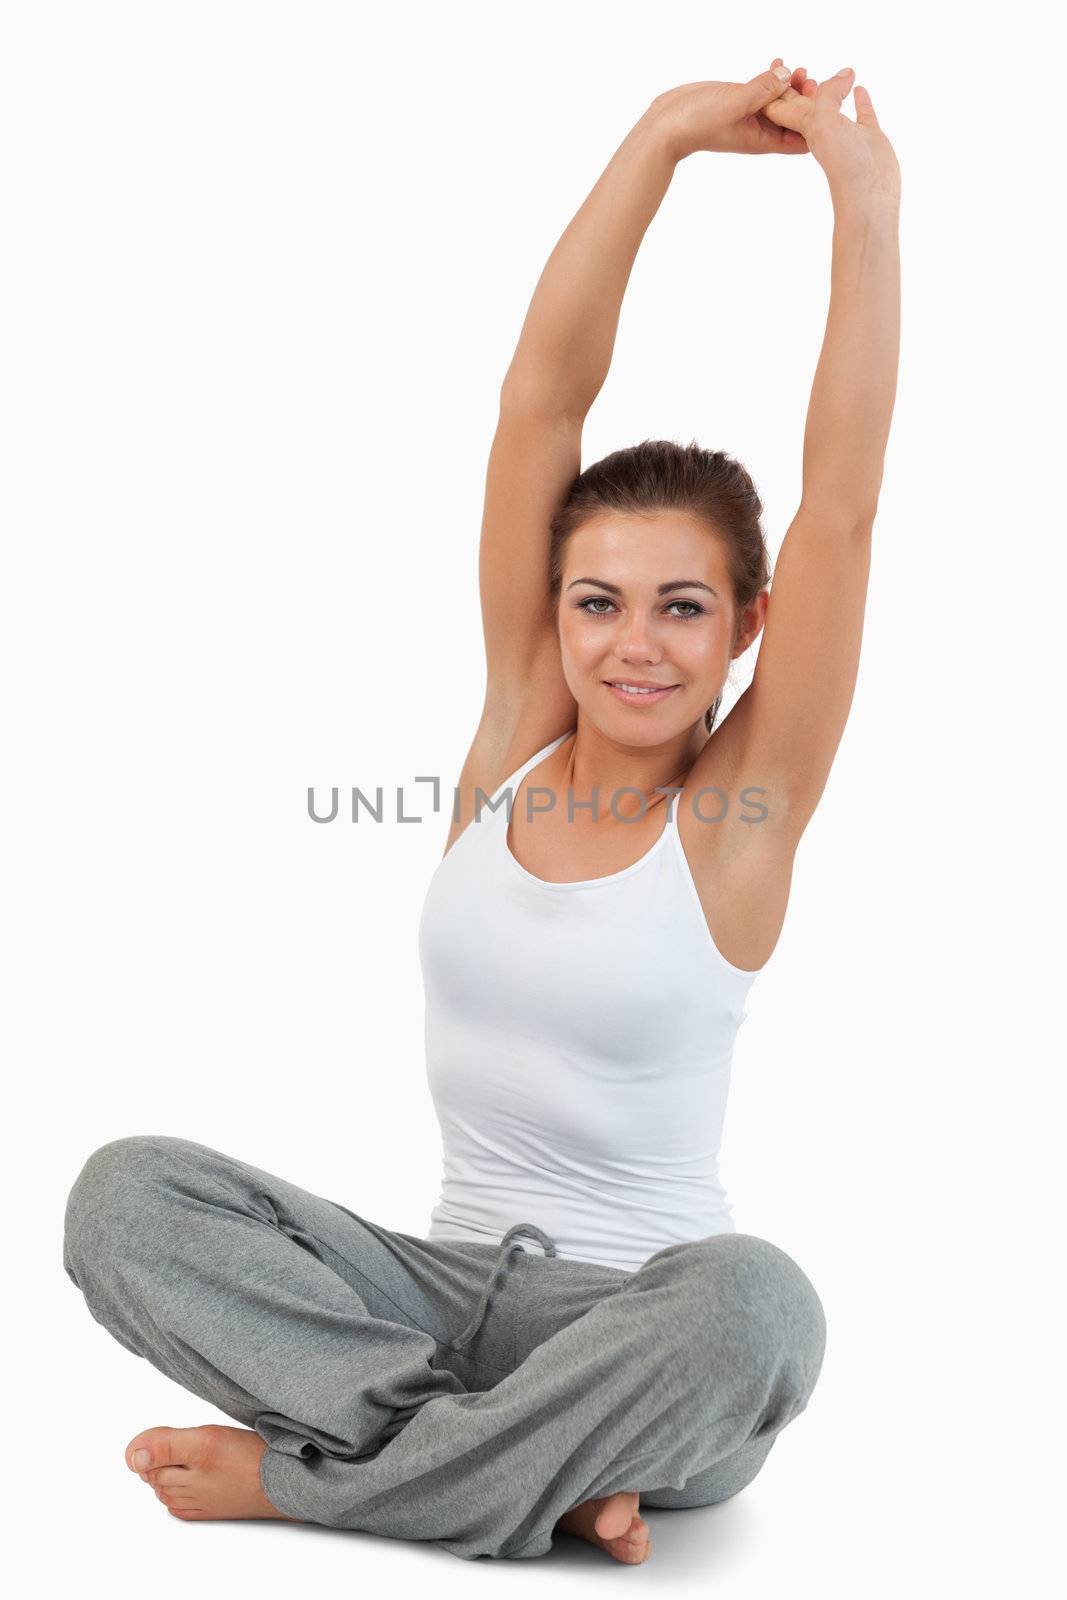 Portrait of a woman stretching her back against a white background